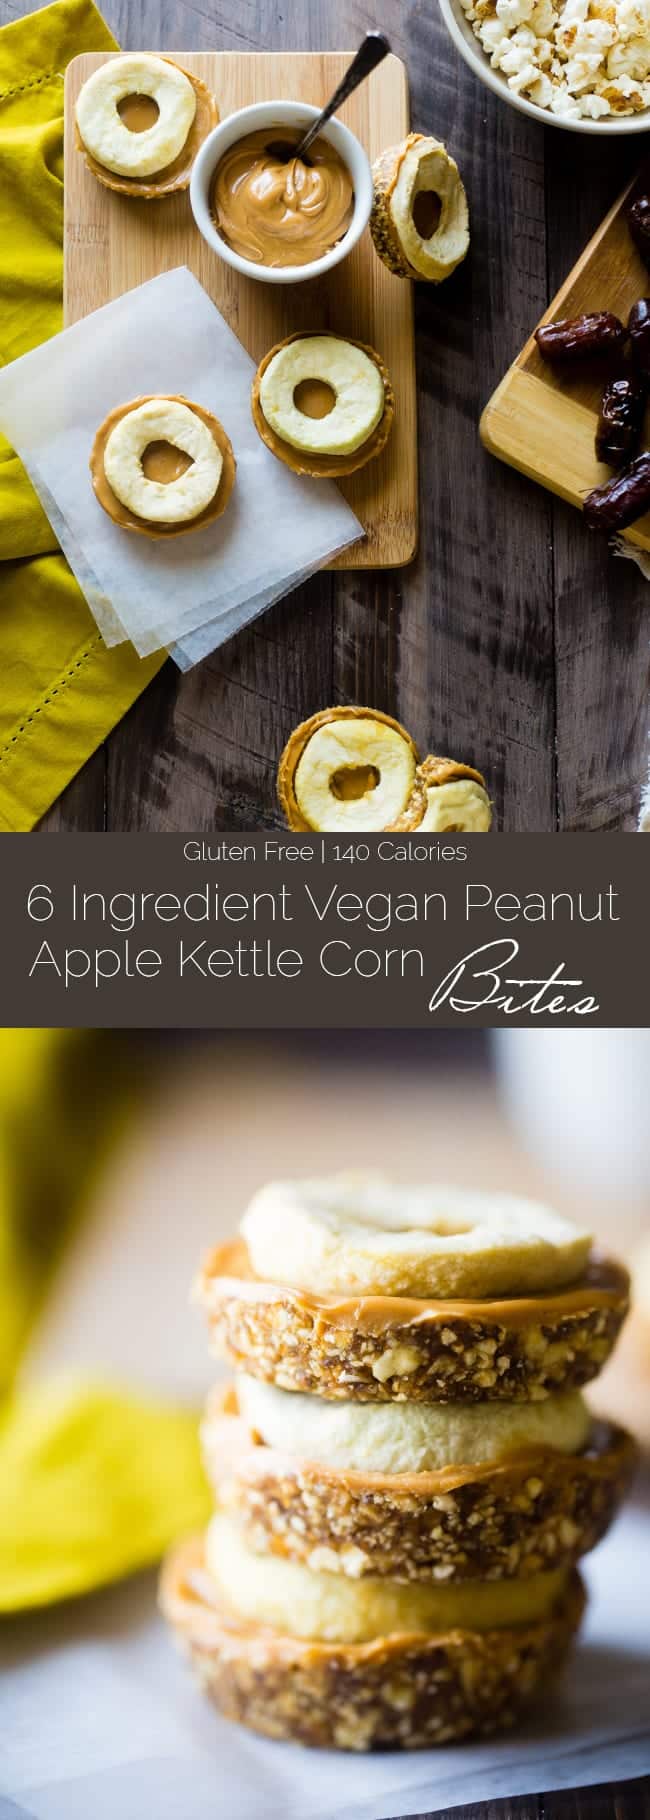 6 Ingredient Vegan Peanut Apple Kettle Corn Bites - These salty-sweet bites are an easy, healthy and gluten free fall snack that's ready in 15 minutes and are only 140 calories! | Foodfaithfitness.com | @FoodFaithFit